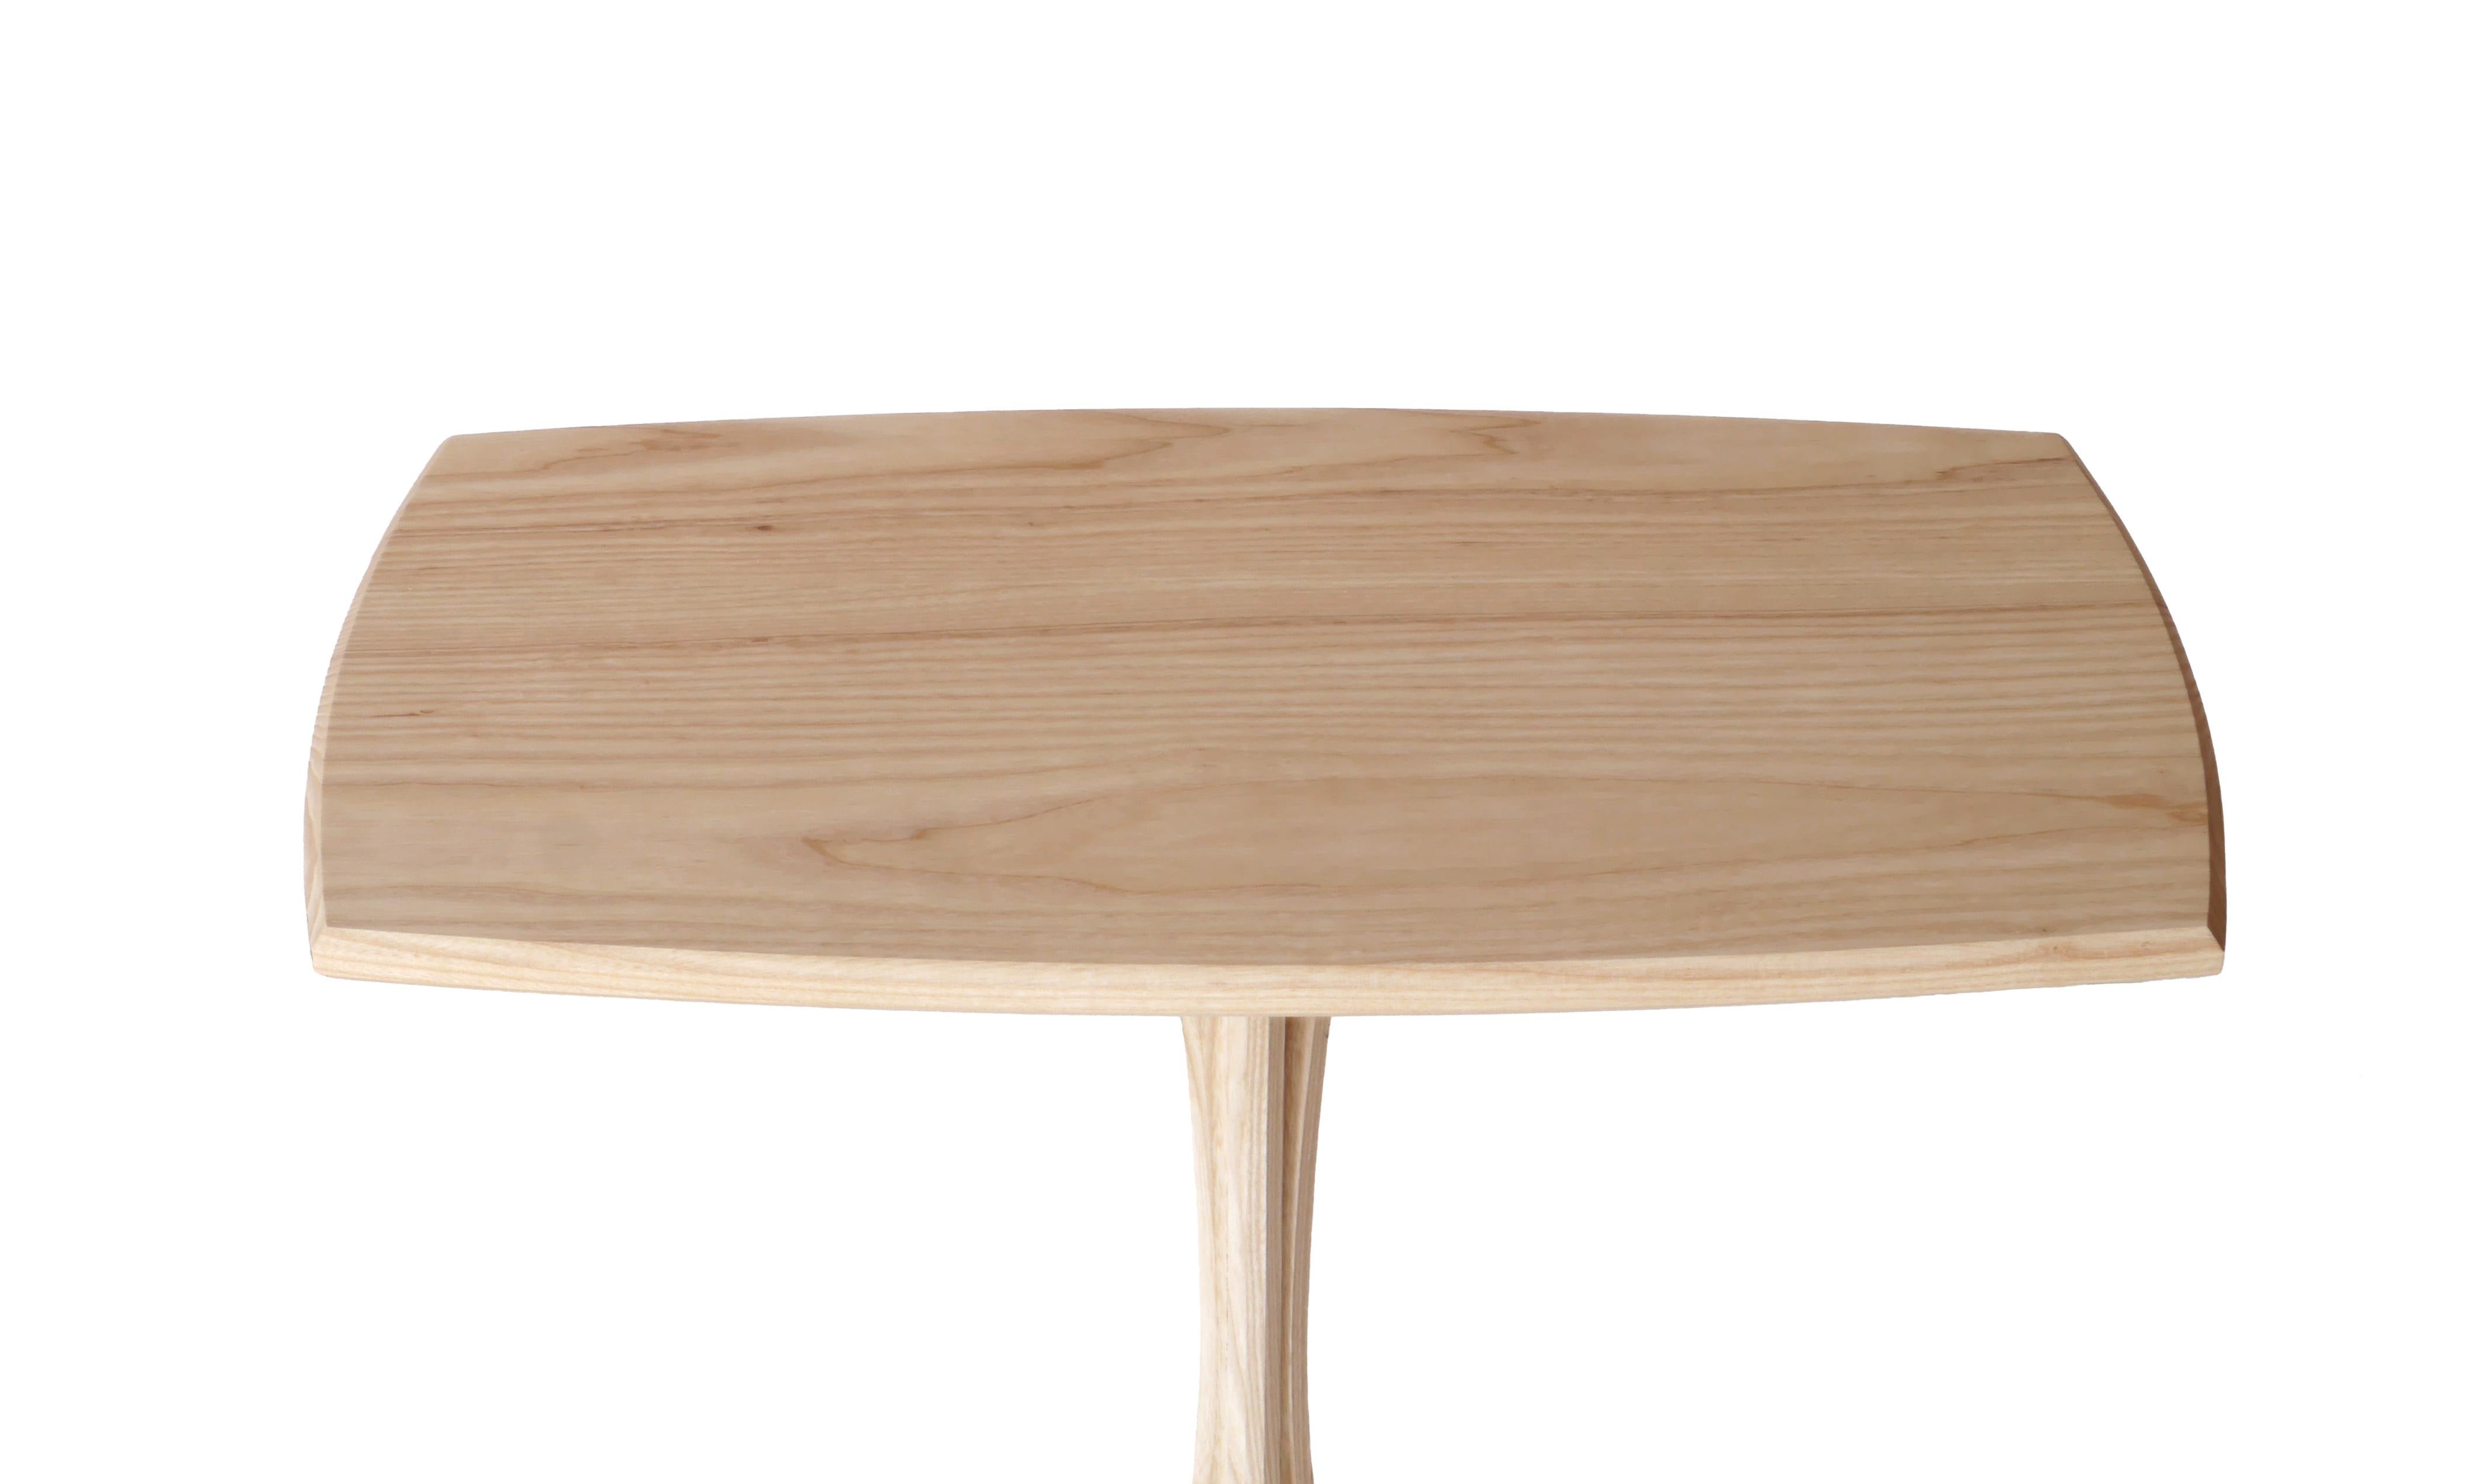 Hand-Crafted Ash Plume Side Table, Contemporary Handmade Pedestal End Table by Arid For Sale